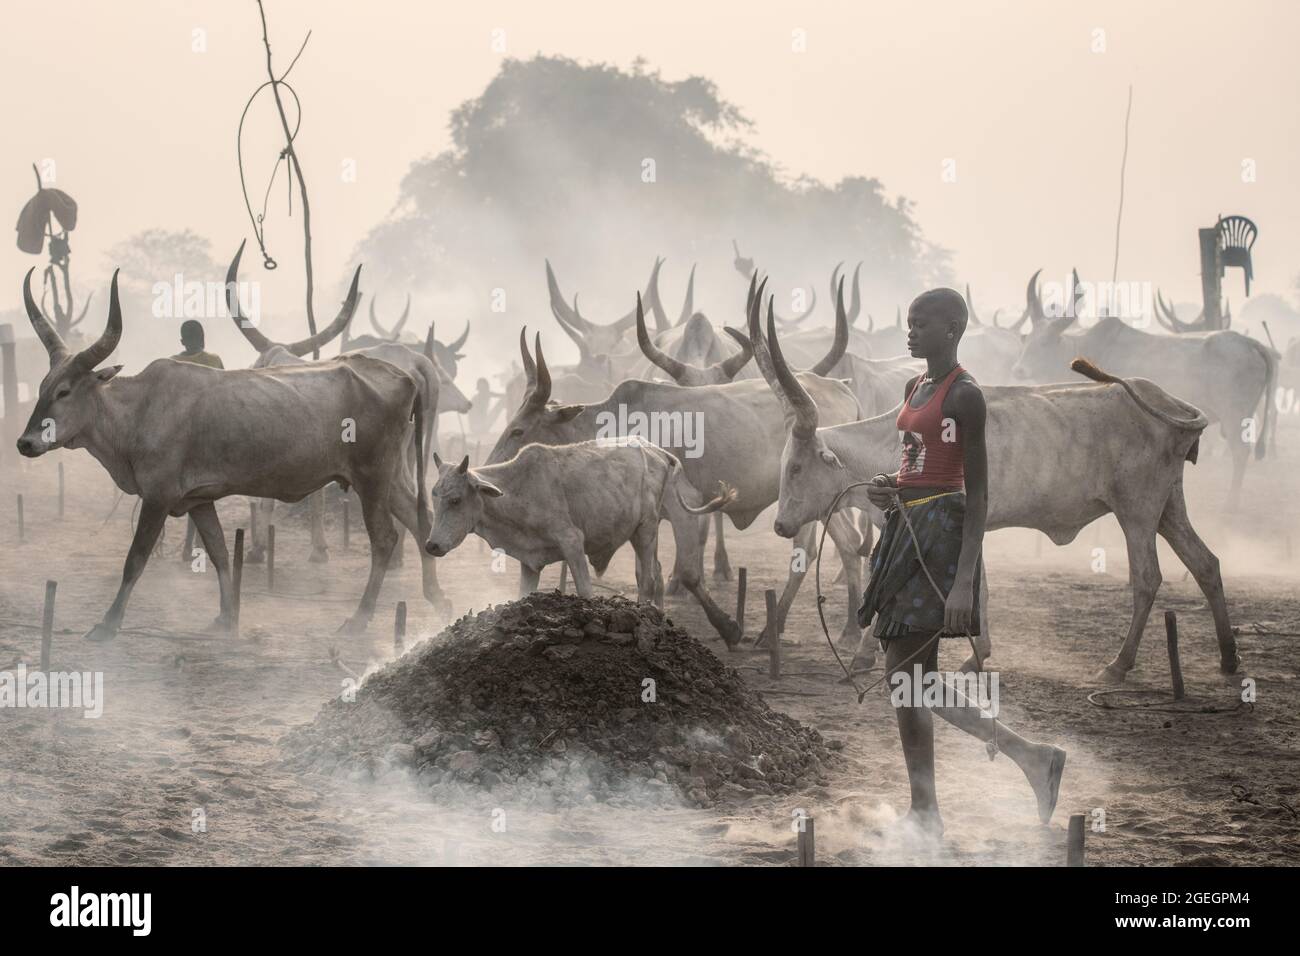 Cows behind a dung fire being herded by a Mundari girl. TEREKEKA, SOUTH SUDAN: In one image, a man stared into the camera surrounded by cows while bra Stock Photo